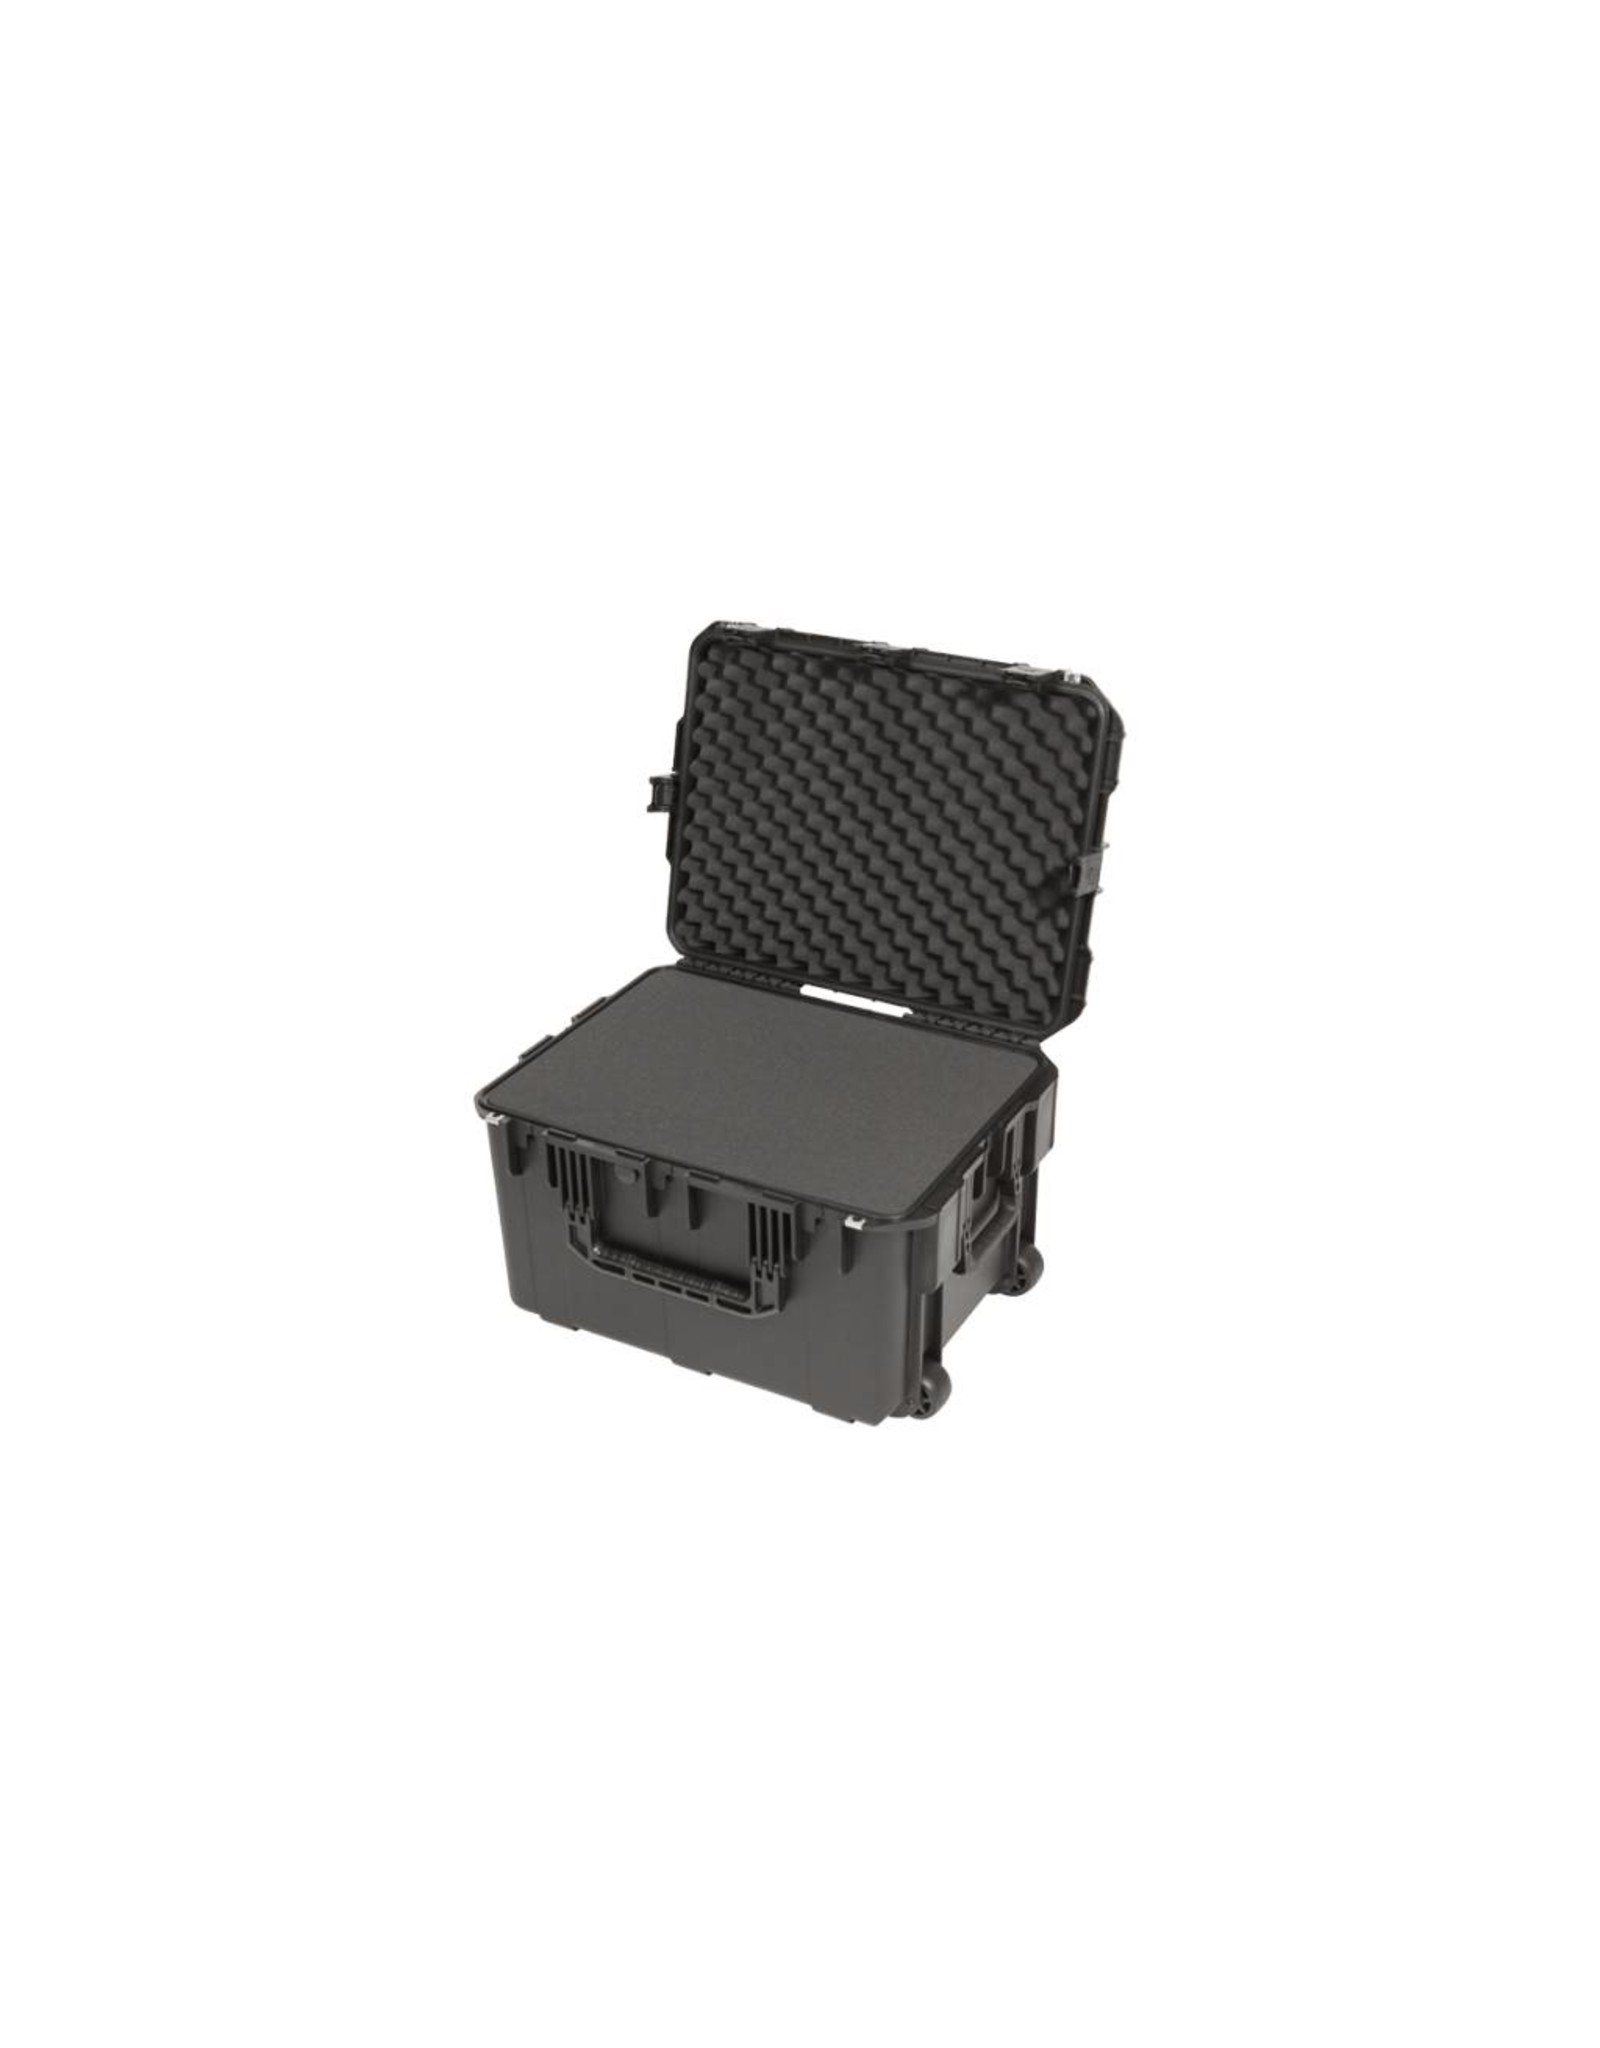 SKB Cases SKB 3i Series 3i-2317-14B-C Waterproof Case (with cubed foam) with wheels